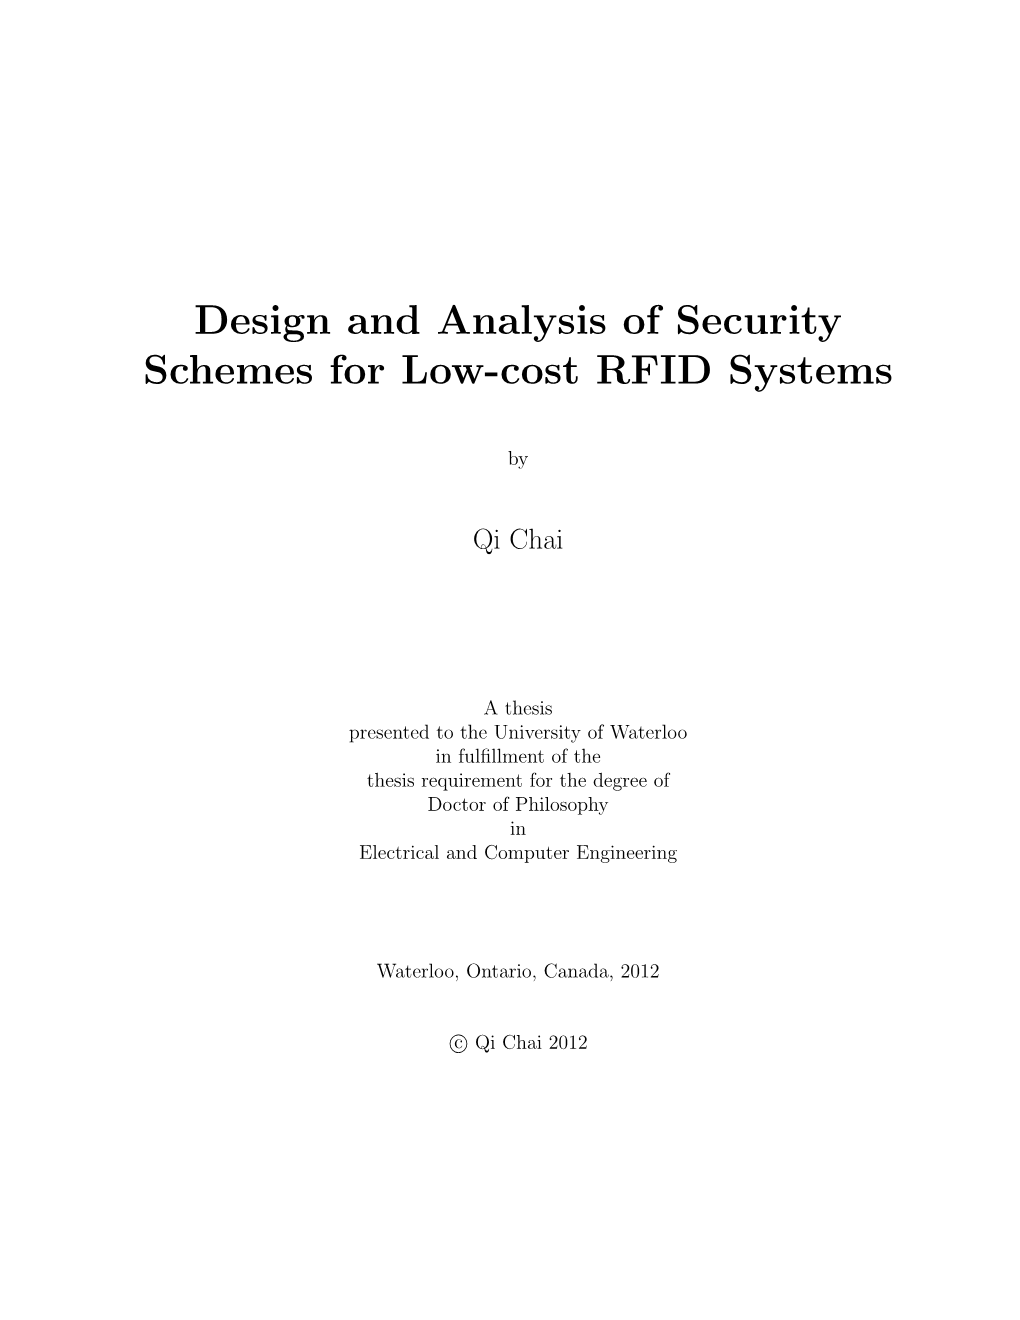 Design and Analysis of Security Schemes for Low-Cost RFID Systems